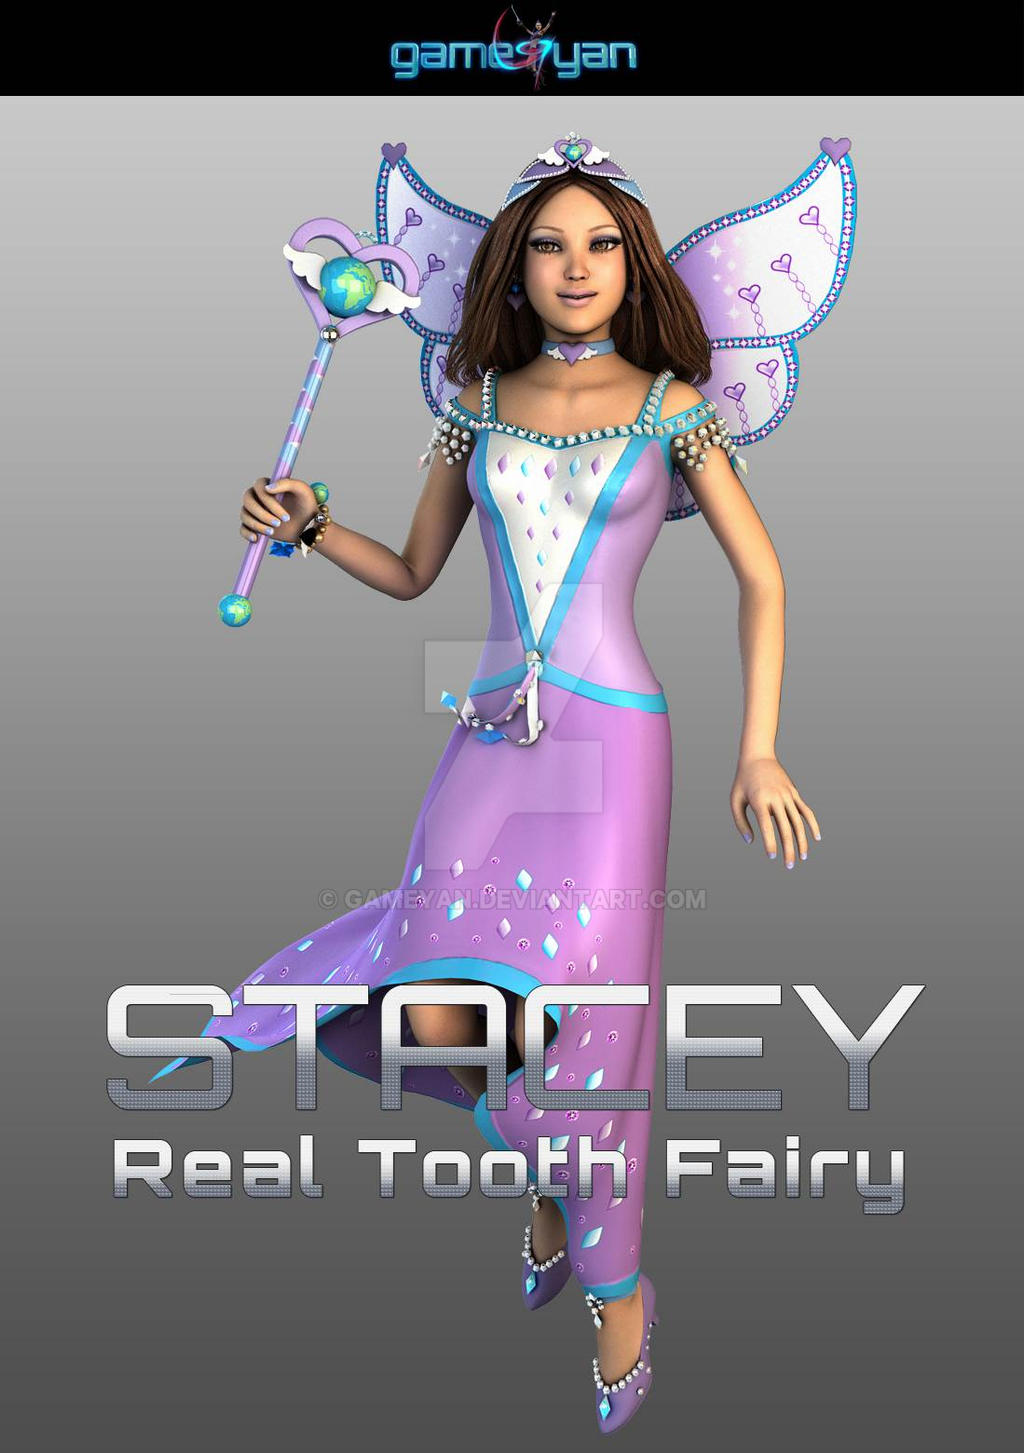 3D Stacey Real Tooth Fairy Cartoon Character Model by gameyan on DeviantArt